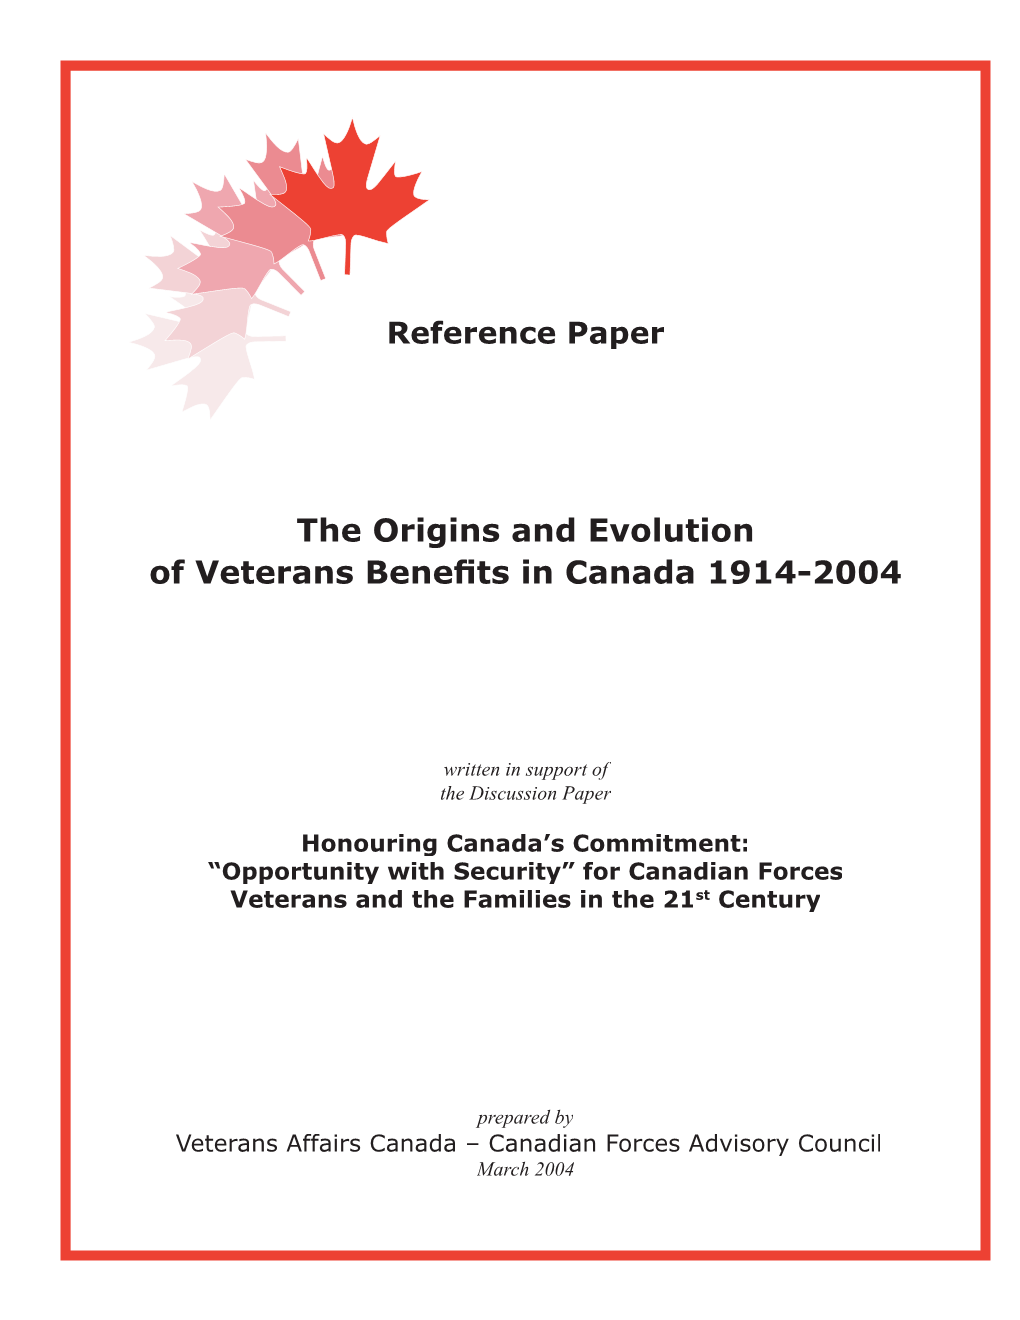 The Origins and Evolution of Veterans Benefits in Canada, 1914-2004.”